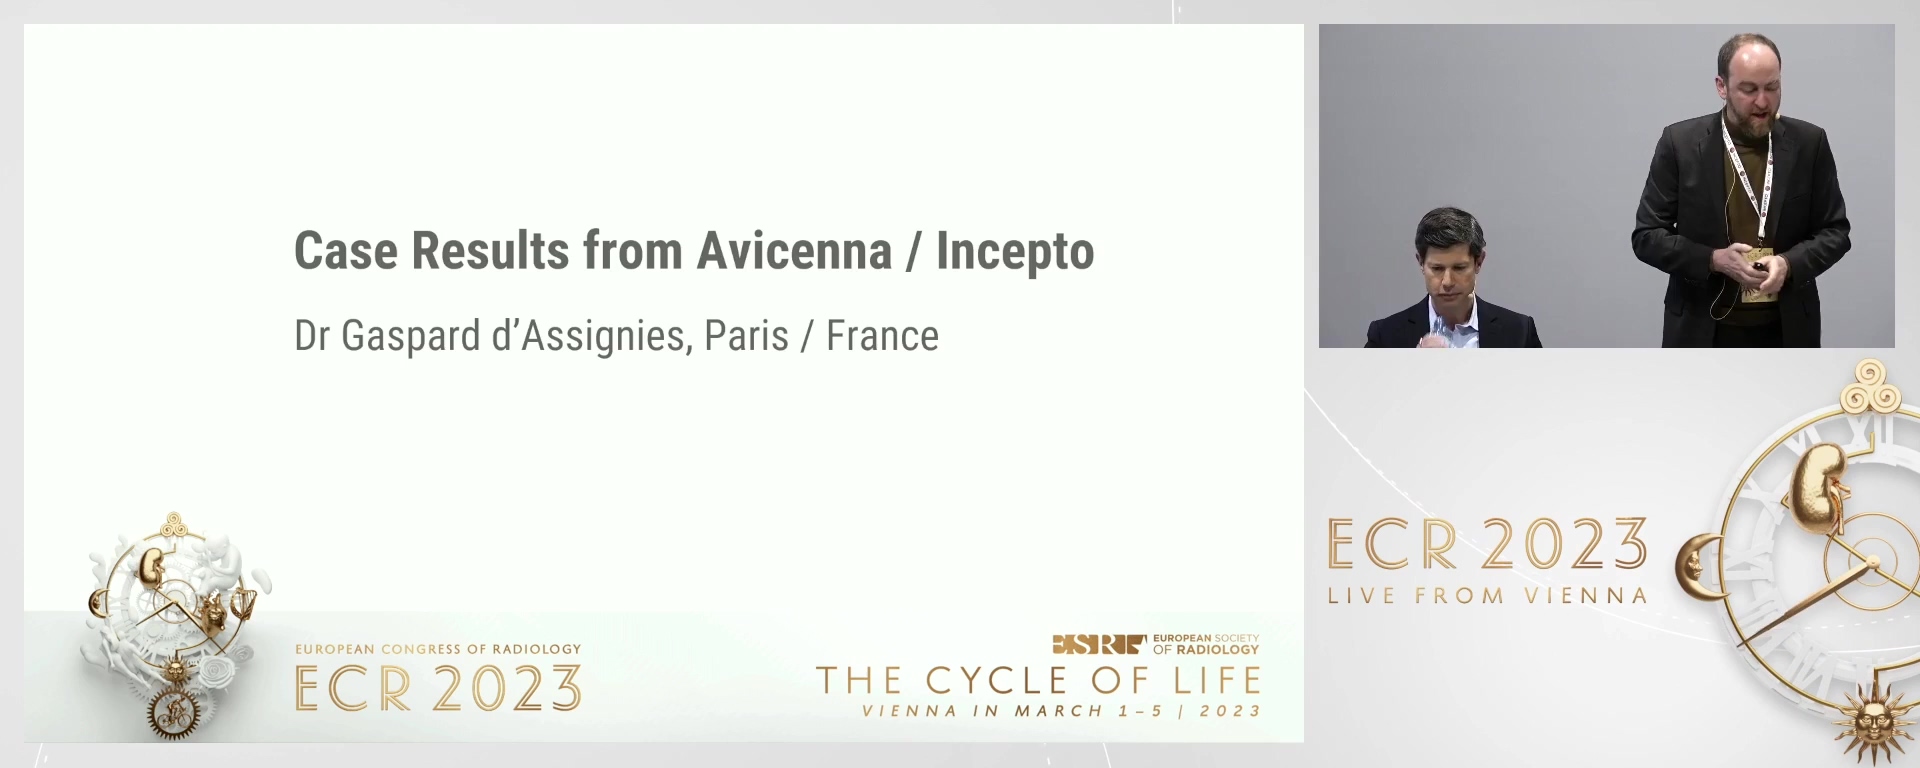 Case Results from Avicenna / Incepto - Gaspard d'Assignies, Paris / FR